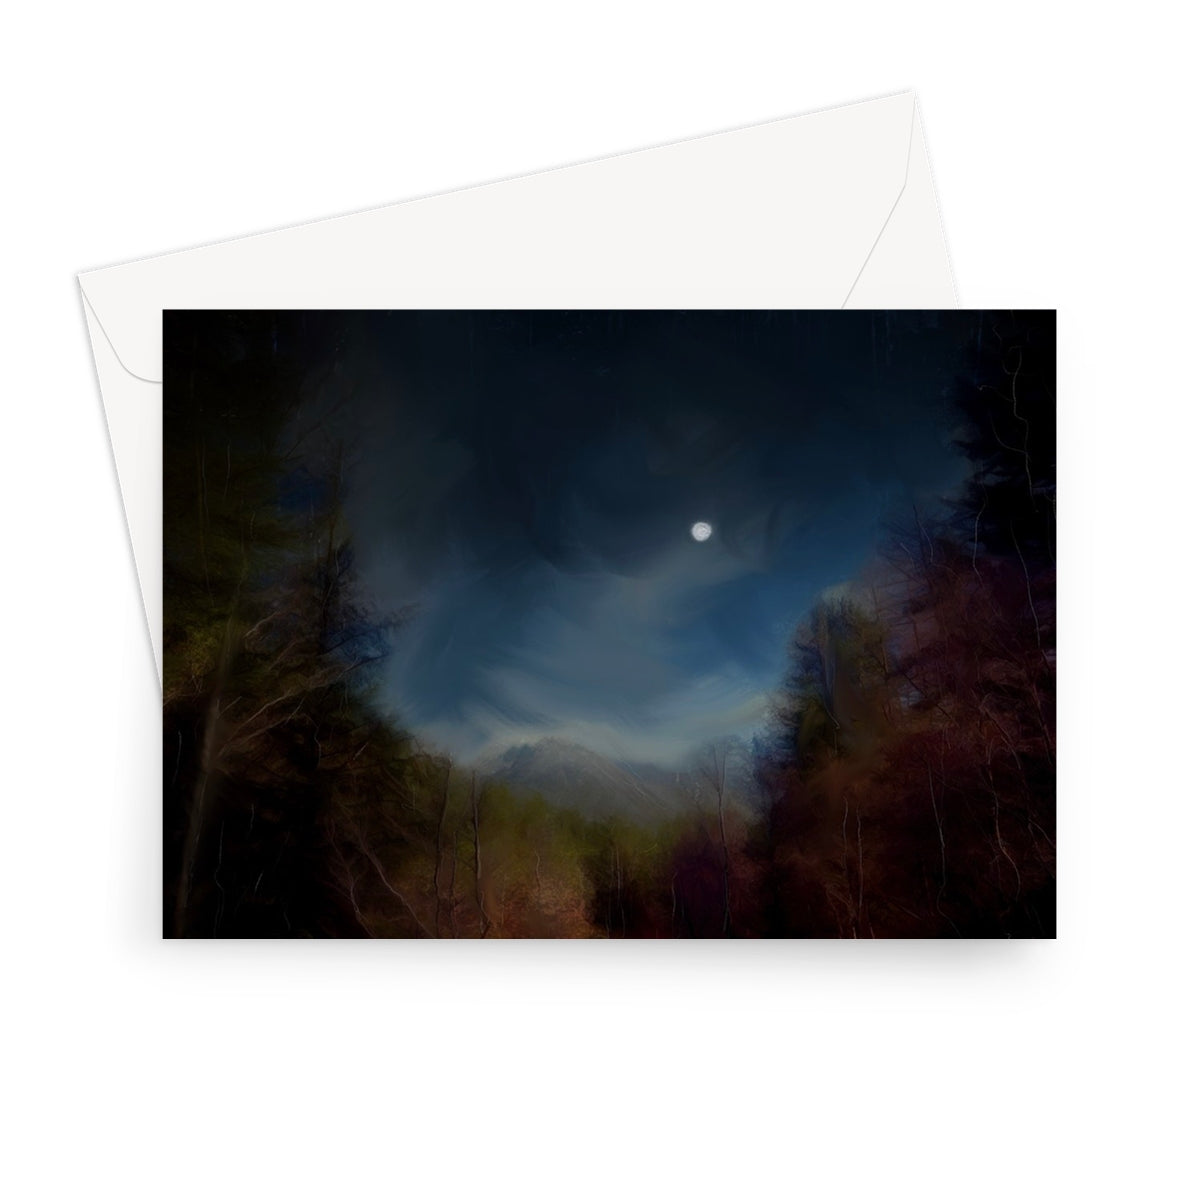 Glencoe Lochan Moonlight Art Gifts Greeting Card-Greetings Cards-Scottish Lochs & Mountains Art Gallery-7"x5"-1 Card-Paintings, Prints, Homeware, Art Gifts From Scotland By Scottish Artist Kevin Hunter